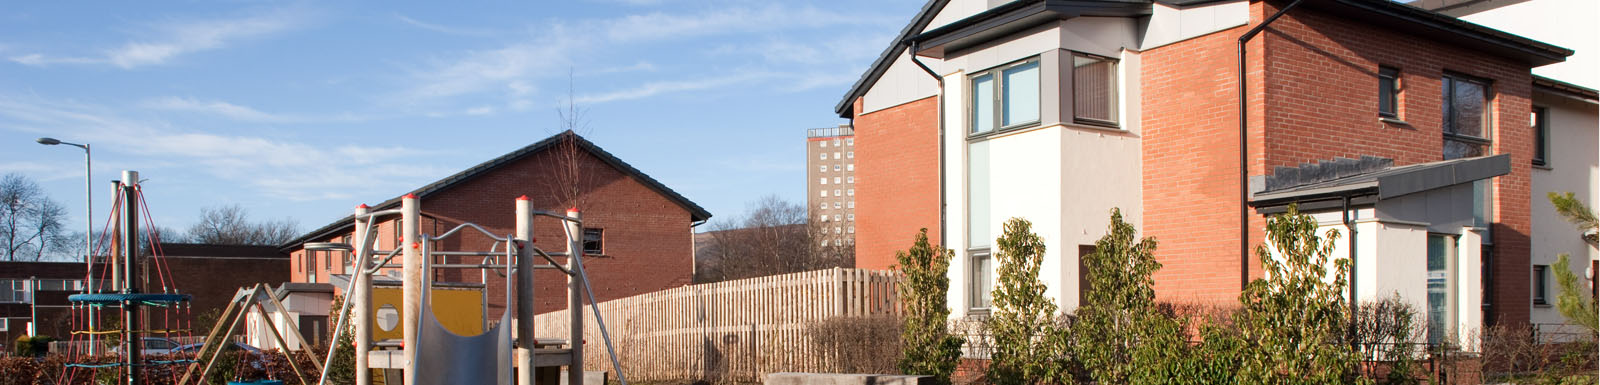 New family homes in Dalmuir